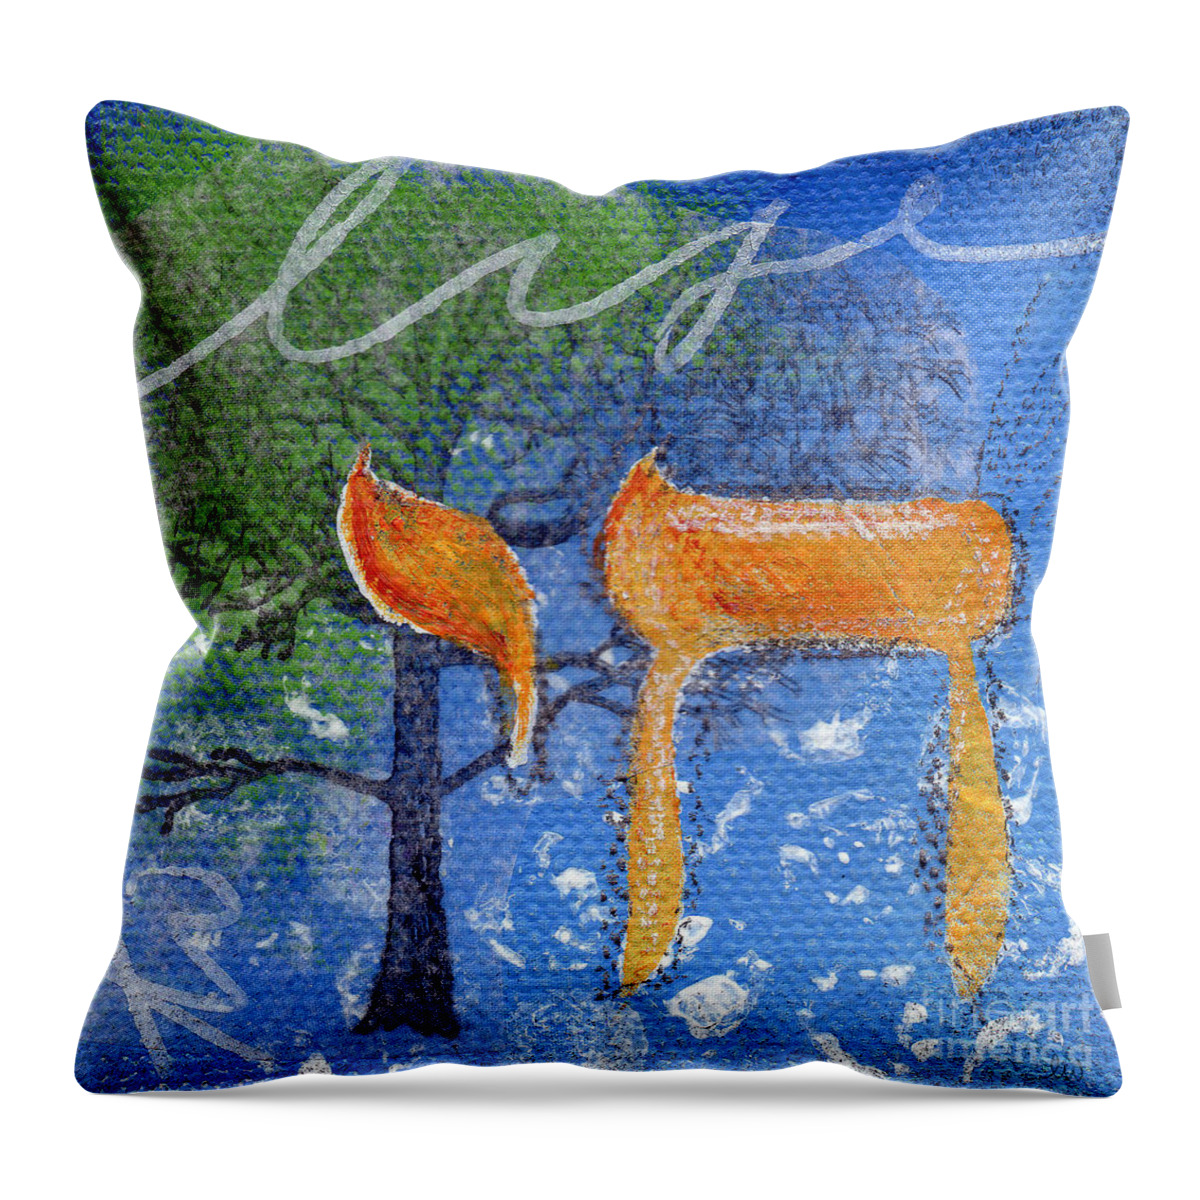 Life Throw Pillow featuring the painting To Life by Linda Woods